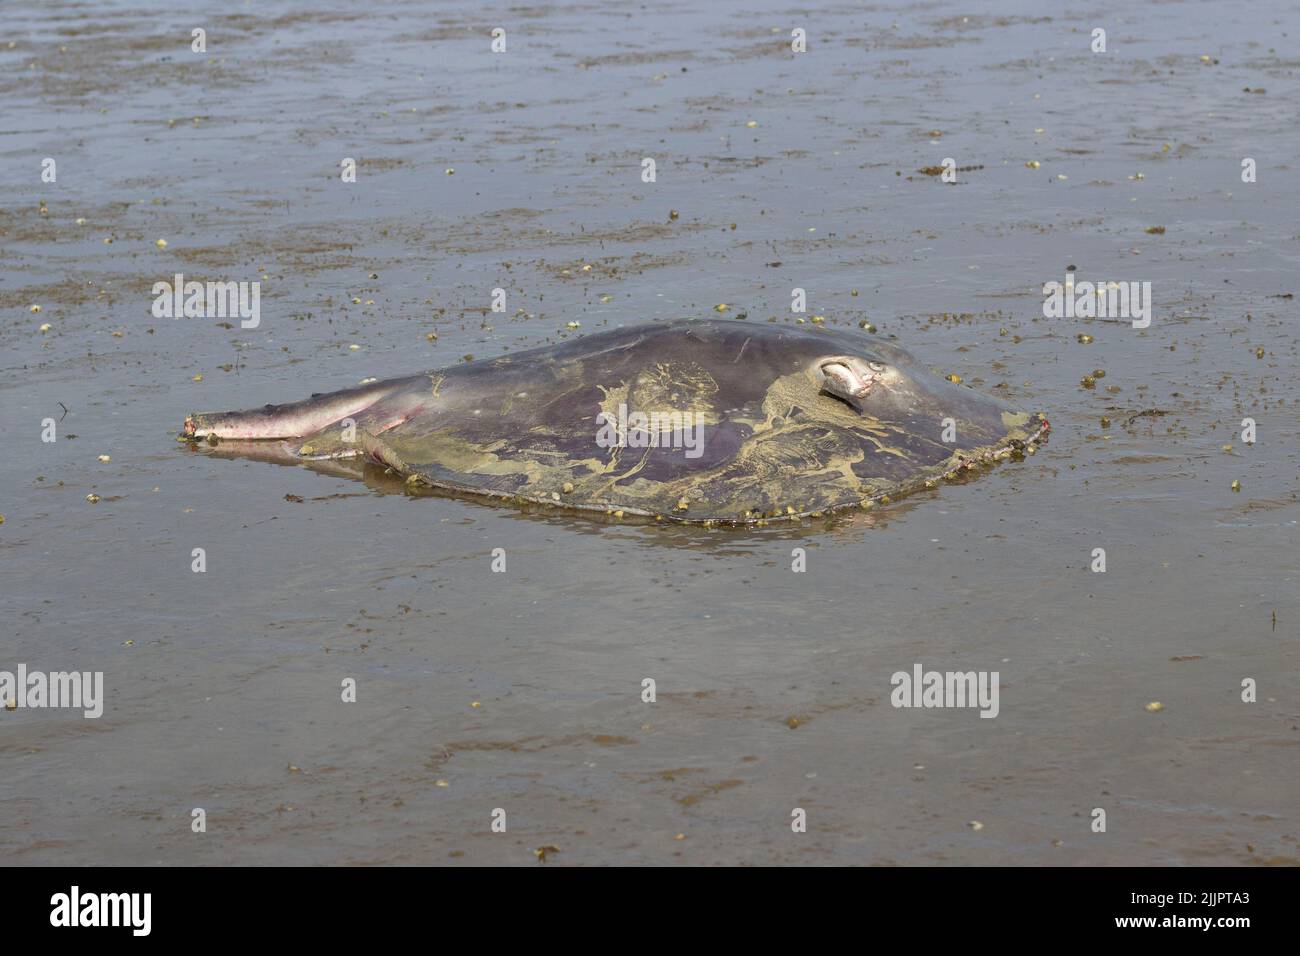 A closeup shot of a dead stingray with its tail cat off at Matakatia beach Stock Photo